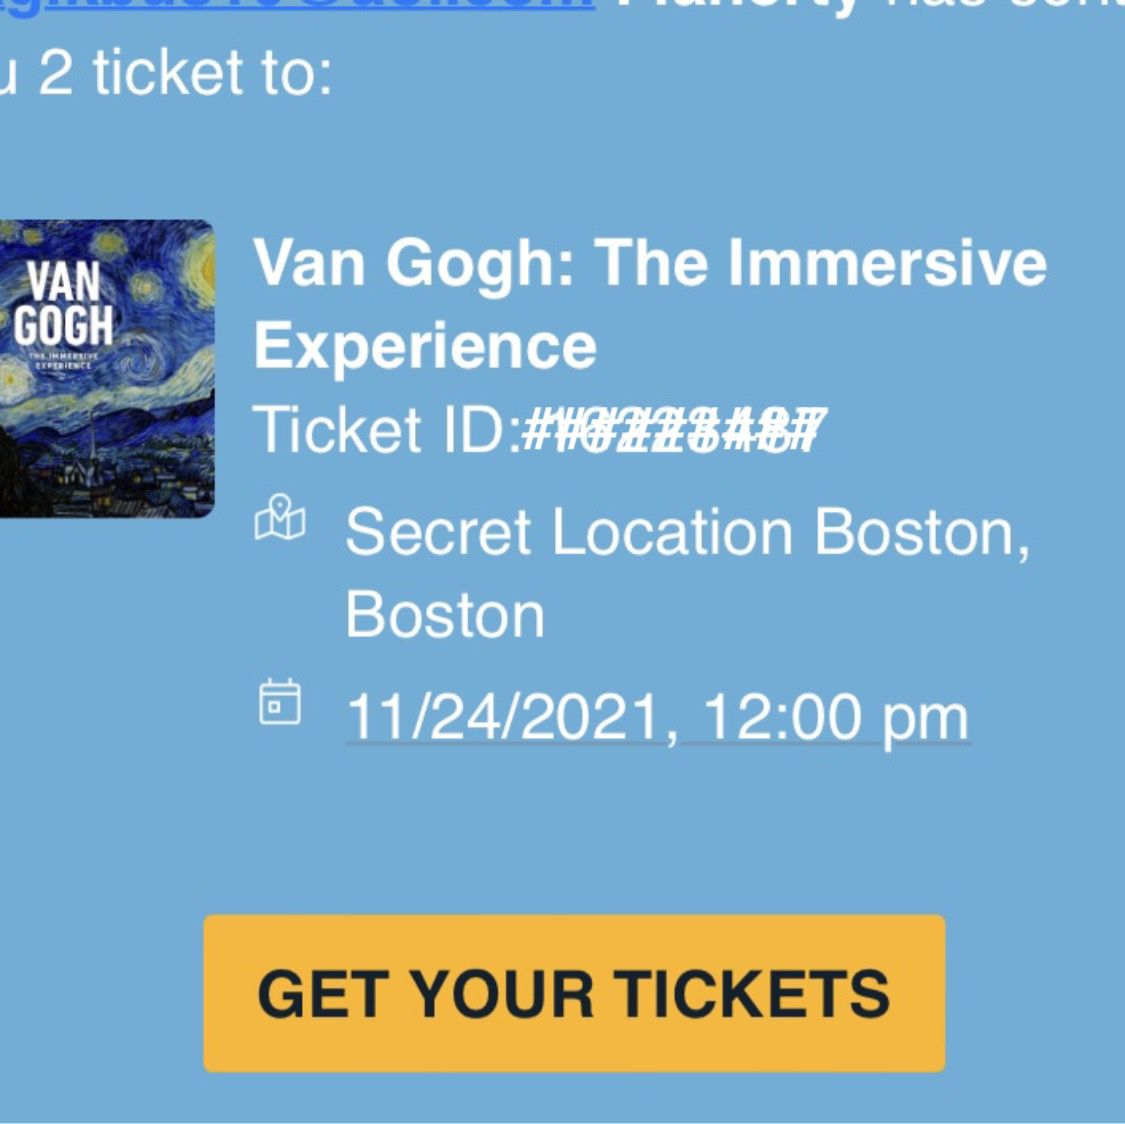 2 Tickets To Van gough immersive Experience 